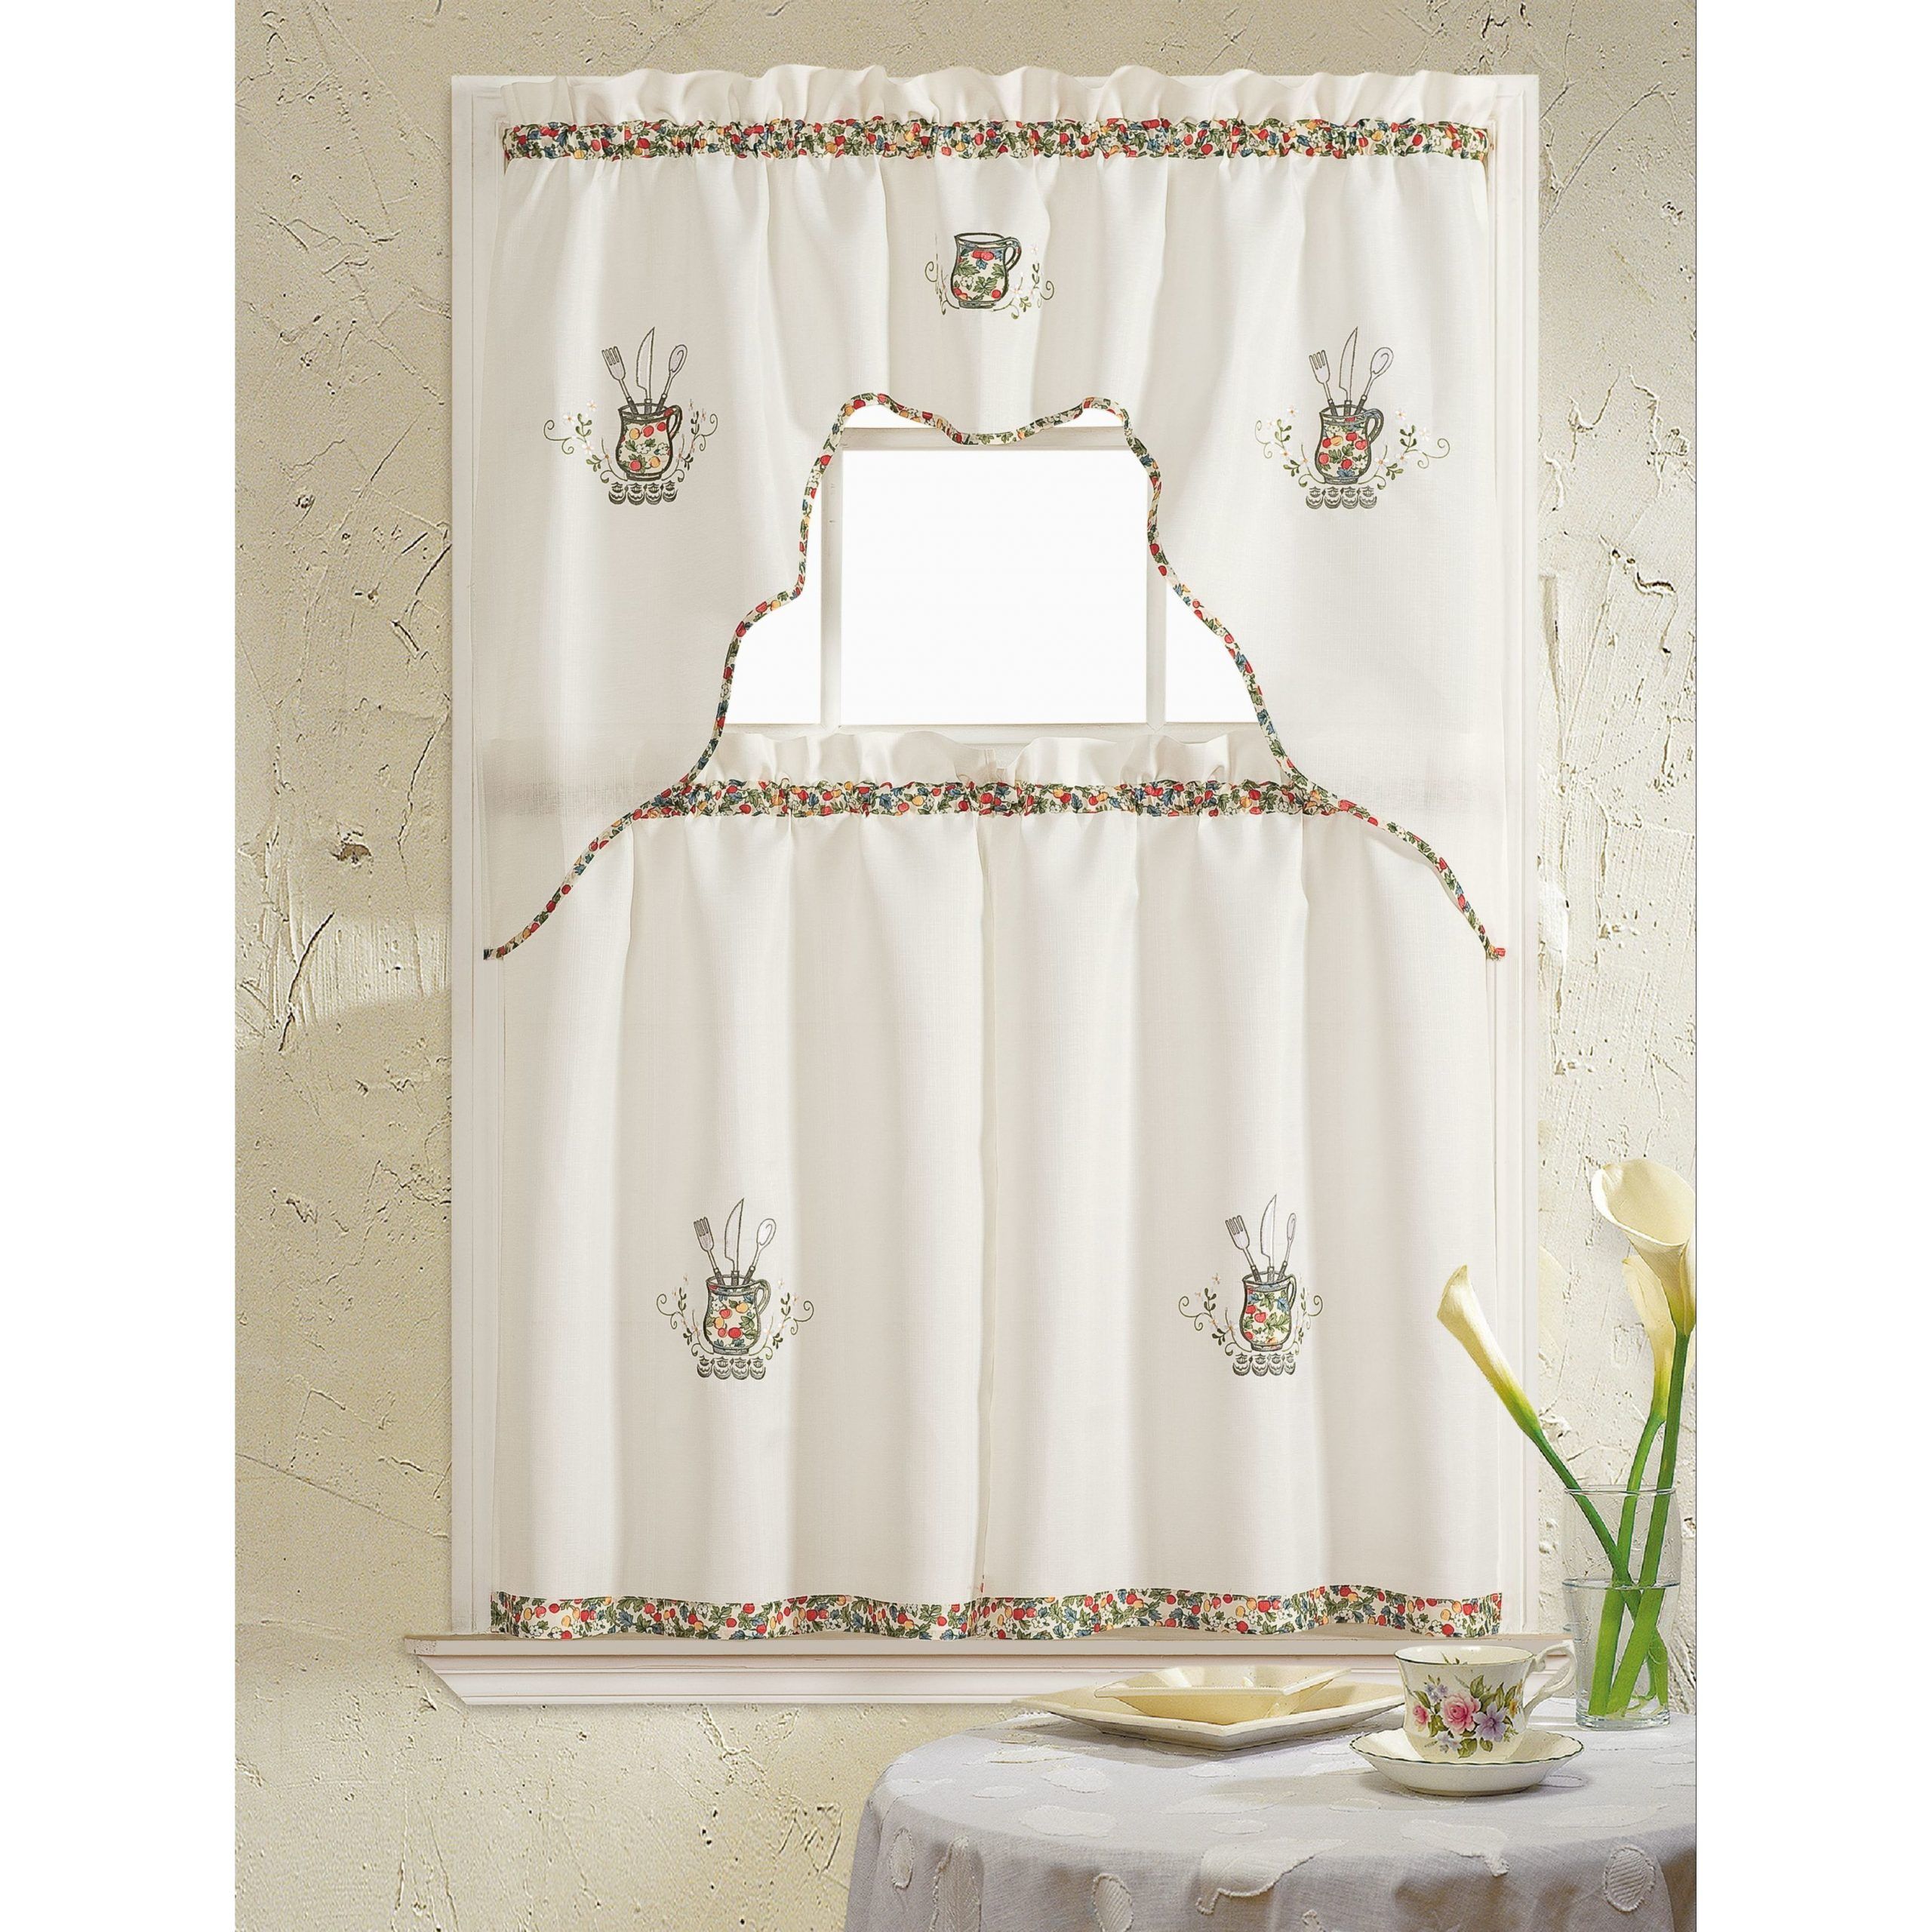 Rt Designers Collection Grand Silver Embroidered Kitchen Curtain Tier Set Inside Imperial Flower Jacquard Tier And Valance Kitchen Curtain Sets (View 7 of 20)